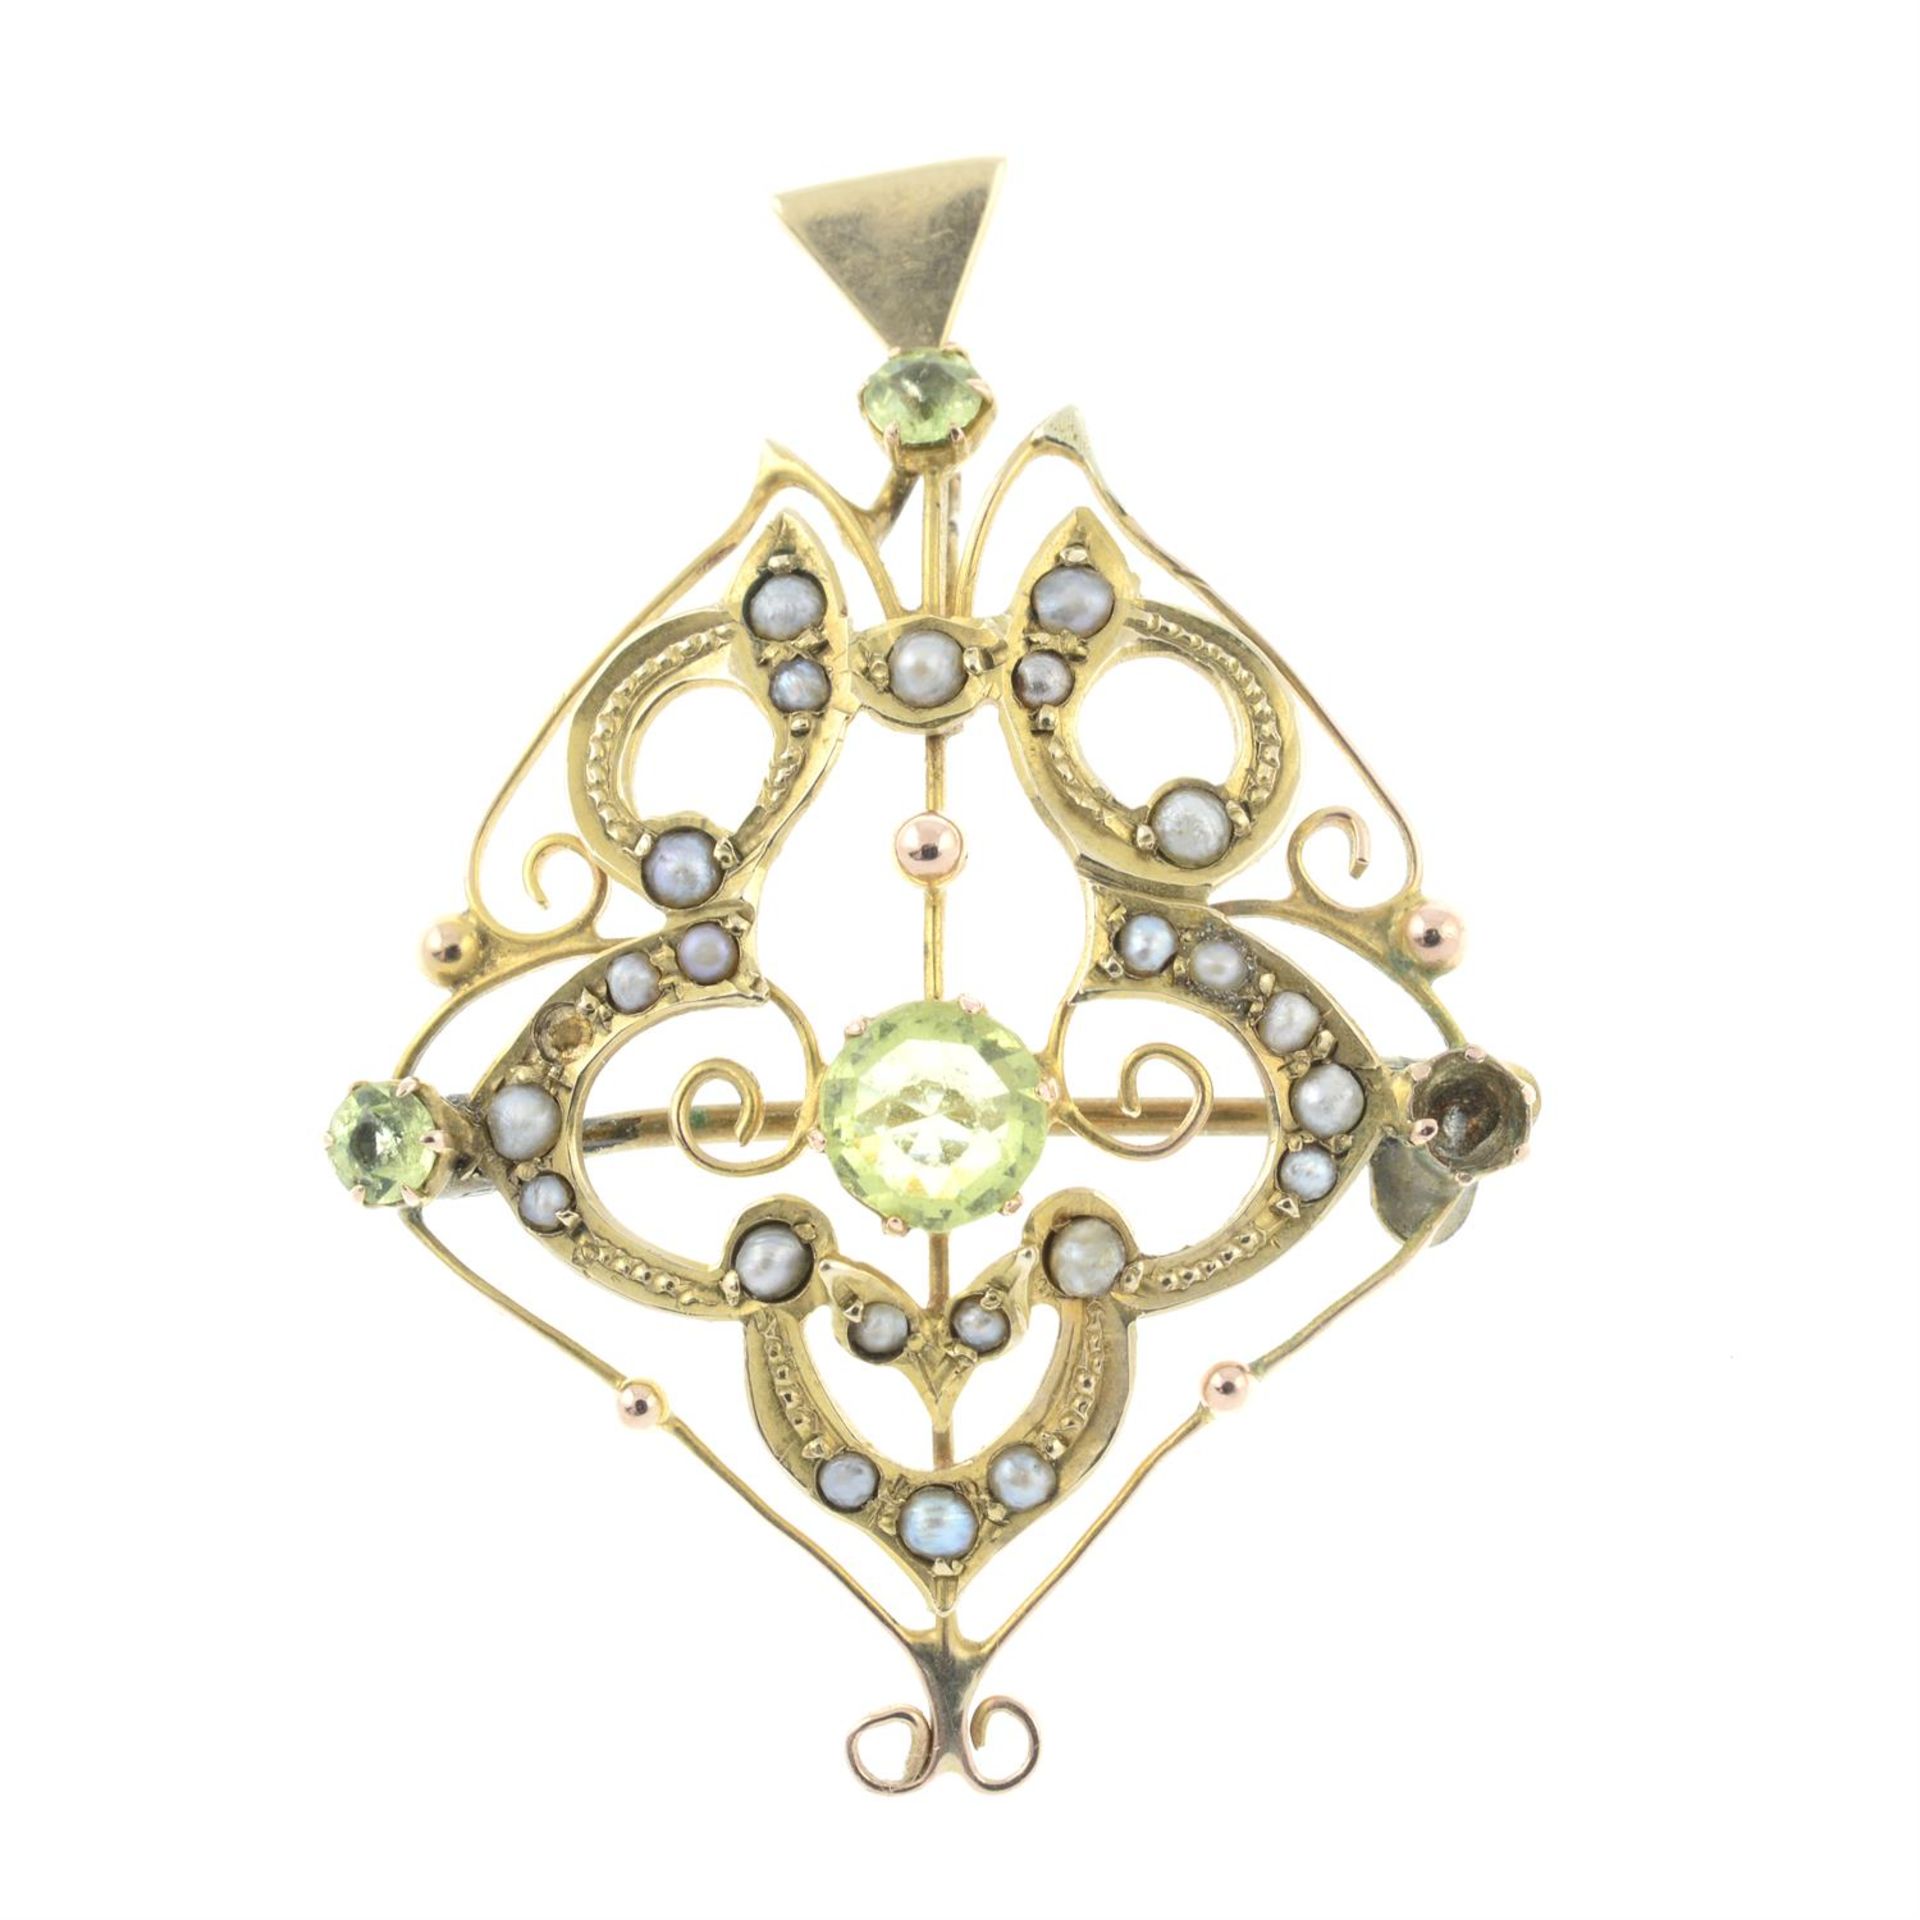 An early 20th century 9ct gold peridot and split pearl openwork brooch/pendant.